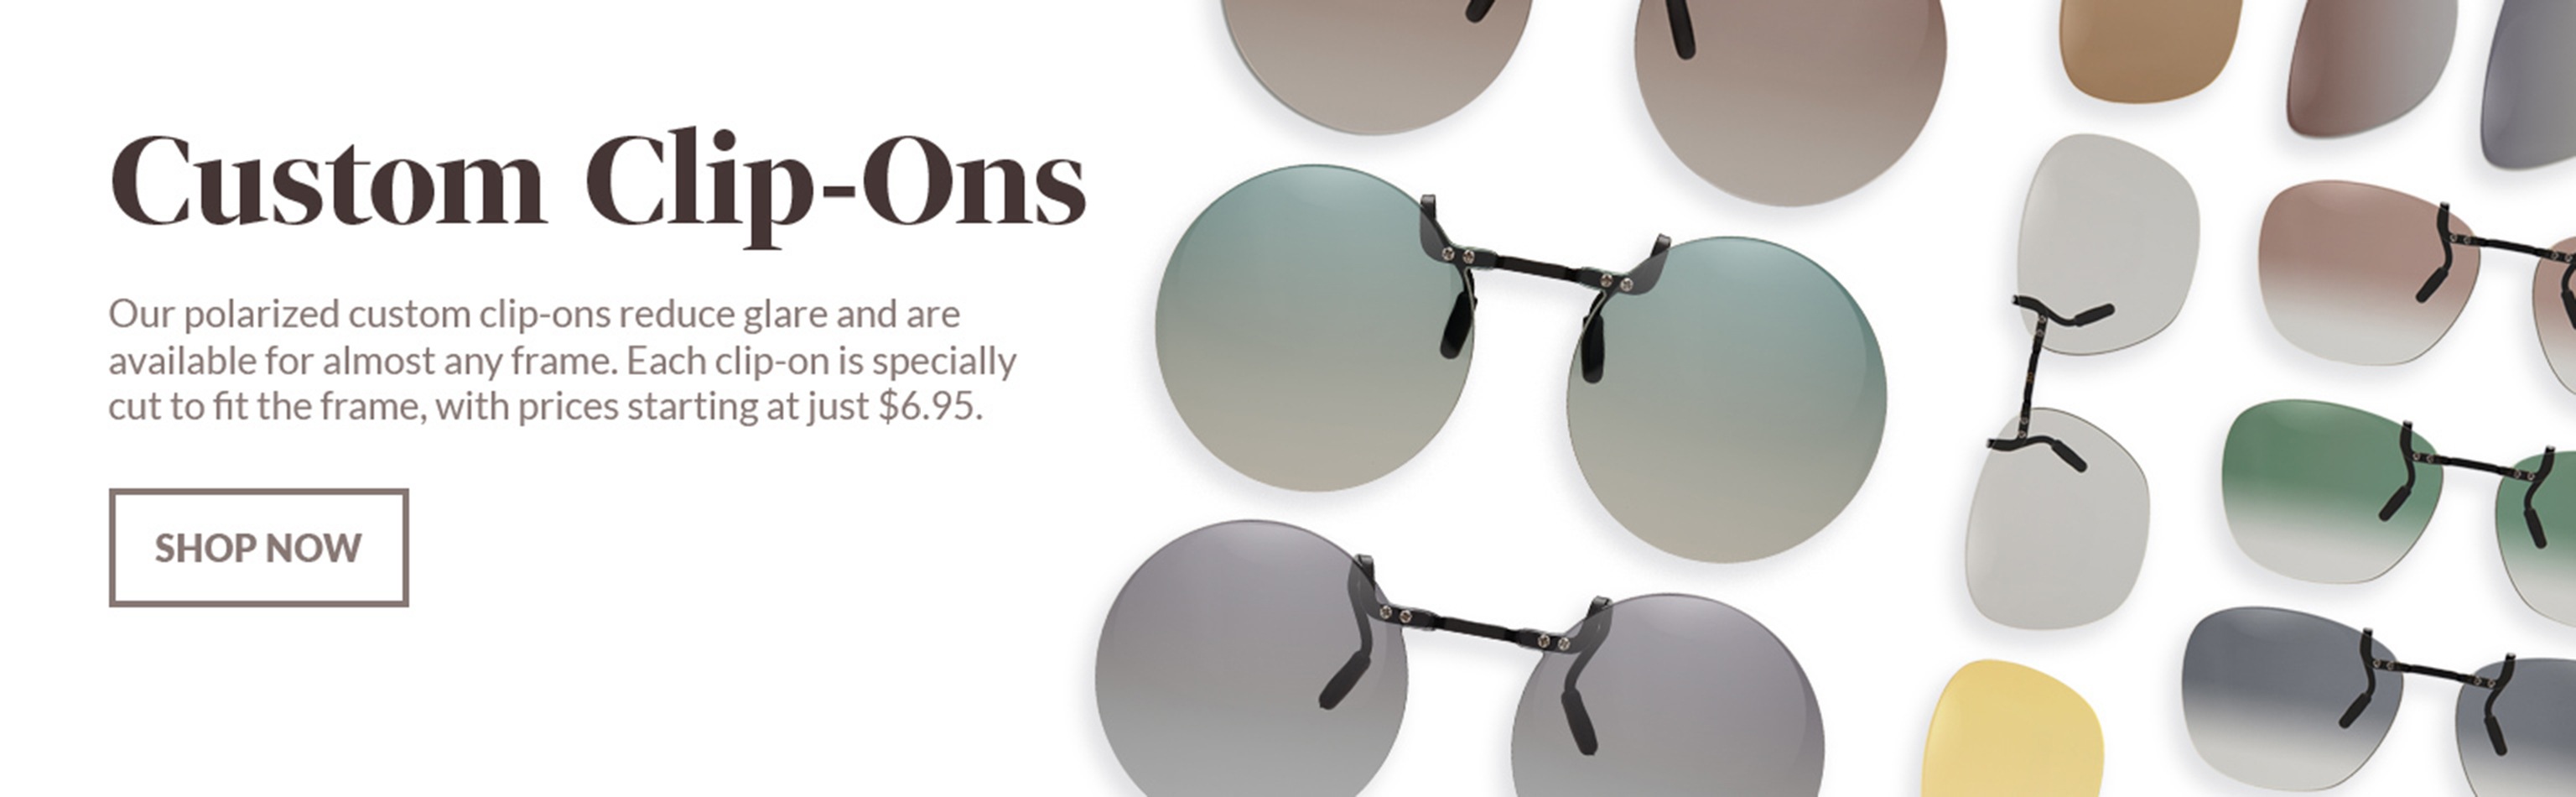 Custom clip-ons. Our polarized custom clip-ons reduce glare and are available for almost any frame. Each clip-on is specially cut to fit the frame, with prices starting at just $7.95. Shop now. Shown: a variety of Zenni custom clip-ons in the various polarized color options.